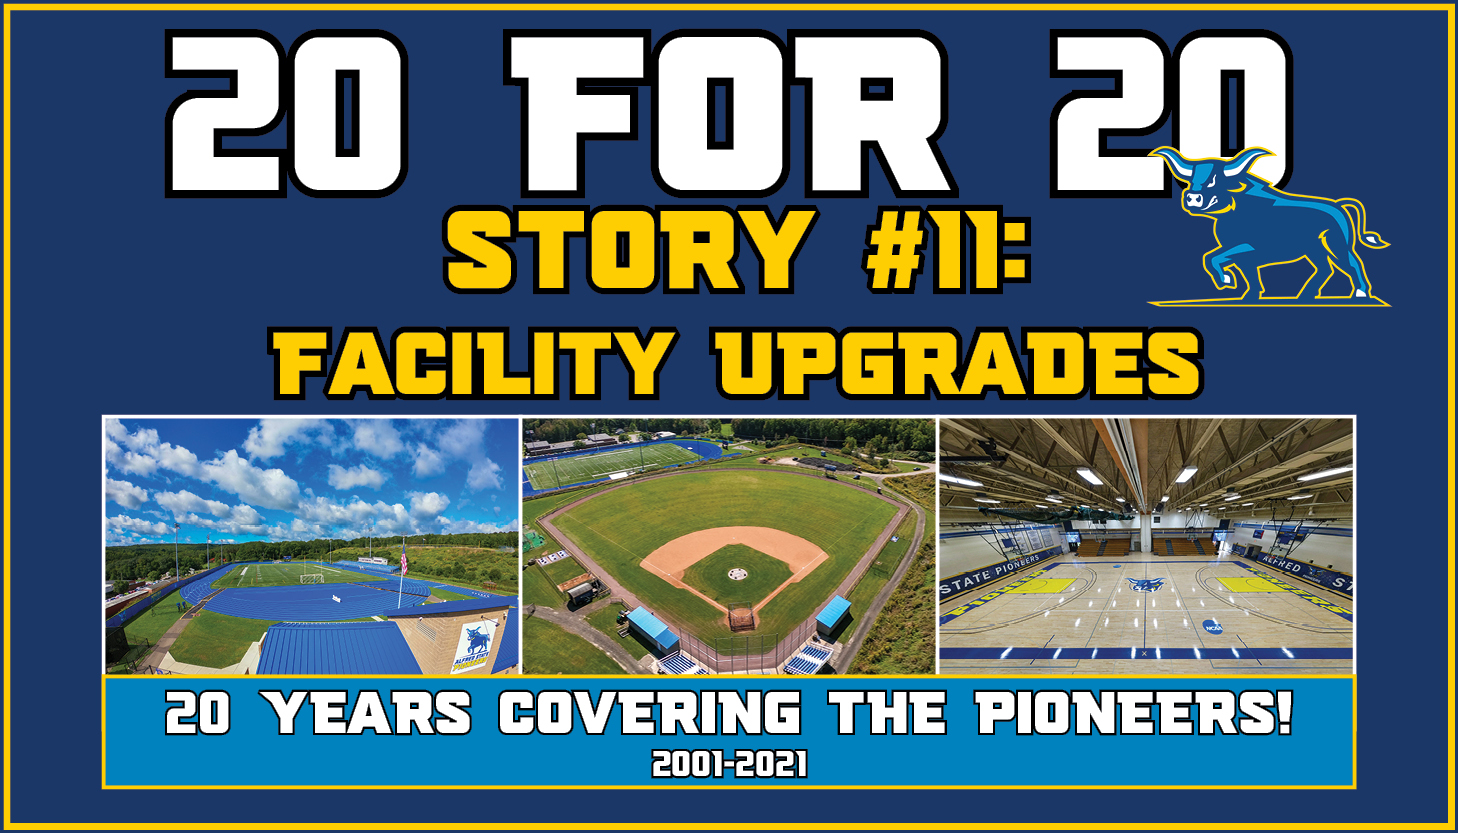 20 for 20 - Story 11 - Facility Upgrades
Pictures of Pioneer Stadium, the baseball field, and the Orvis Gymnasium.